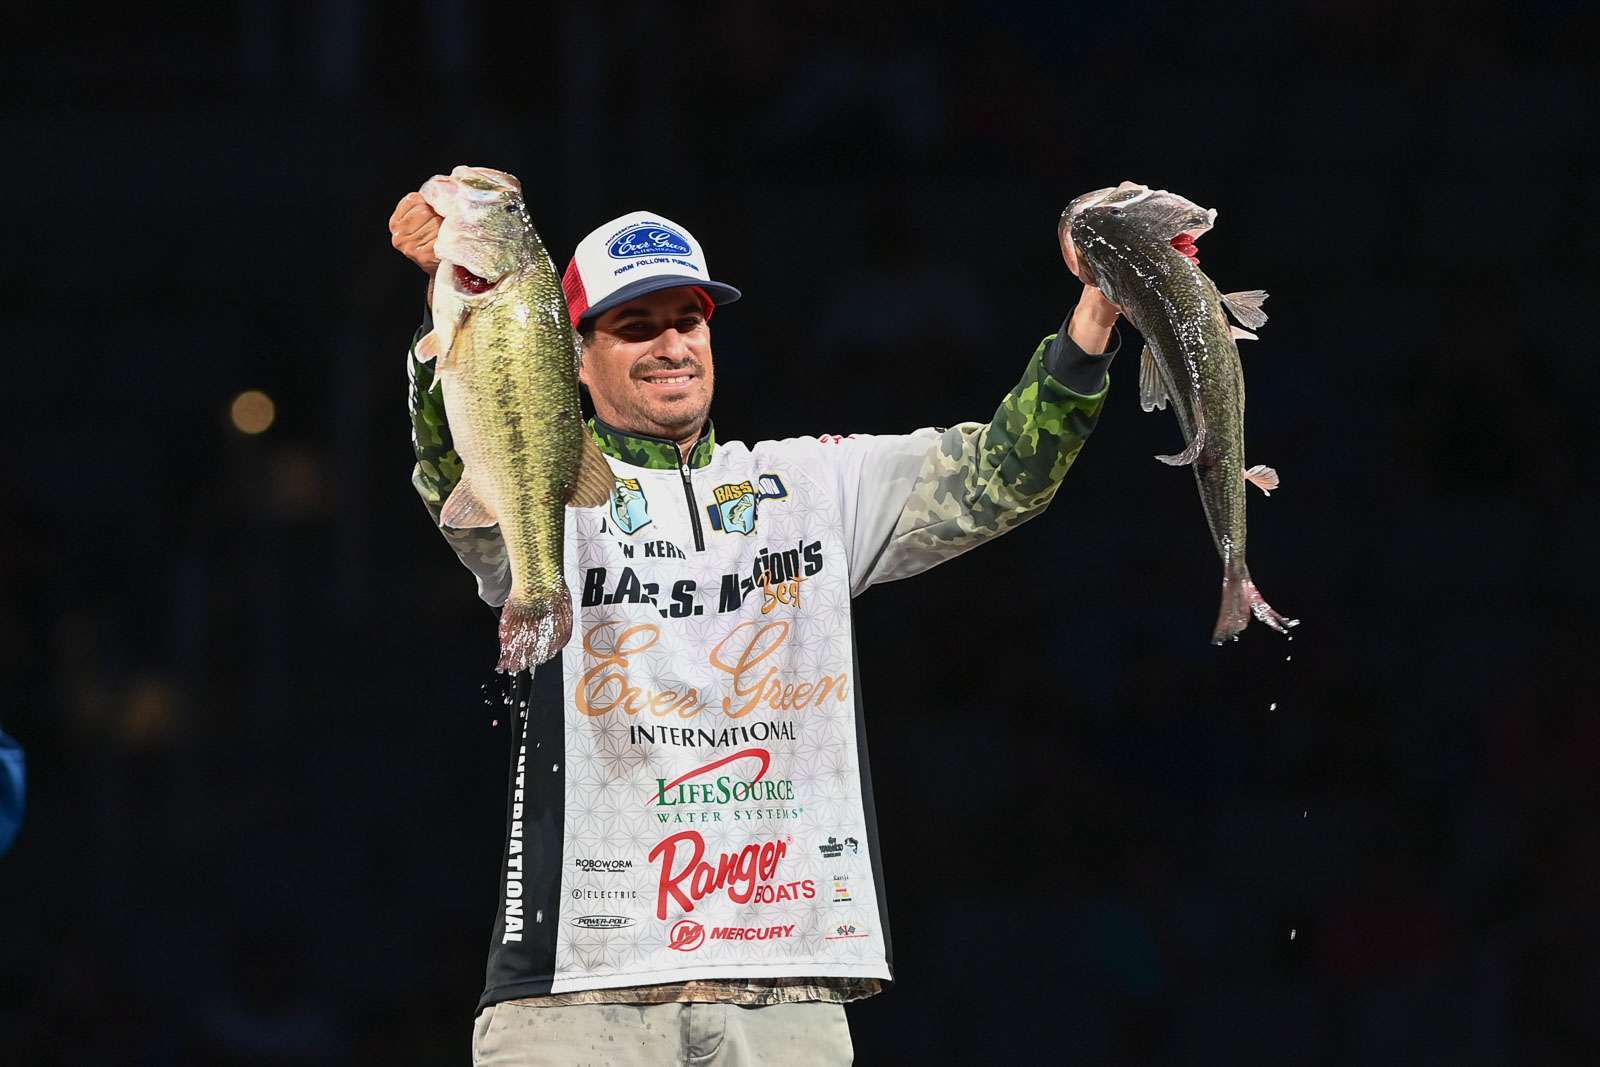 Justin Kerr of Lake Havasu, Ariz., represented the B.A.S.S. Nation well as he came in with the biggest bag on Day 2. The bulk of Kerrâs 19-12 came from a 6-12 and a 7-2 that moved him up from 22nd to second. His big jump elicited comparisons to the only Nation angler to ever win a Classic, Bryan Kerchal in 1994. On the final day, Kerr didnât get the big bites, catching a limit going 12-0 to finish fourth with 45-2, 5-13 back of the winning weight. 